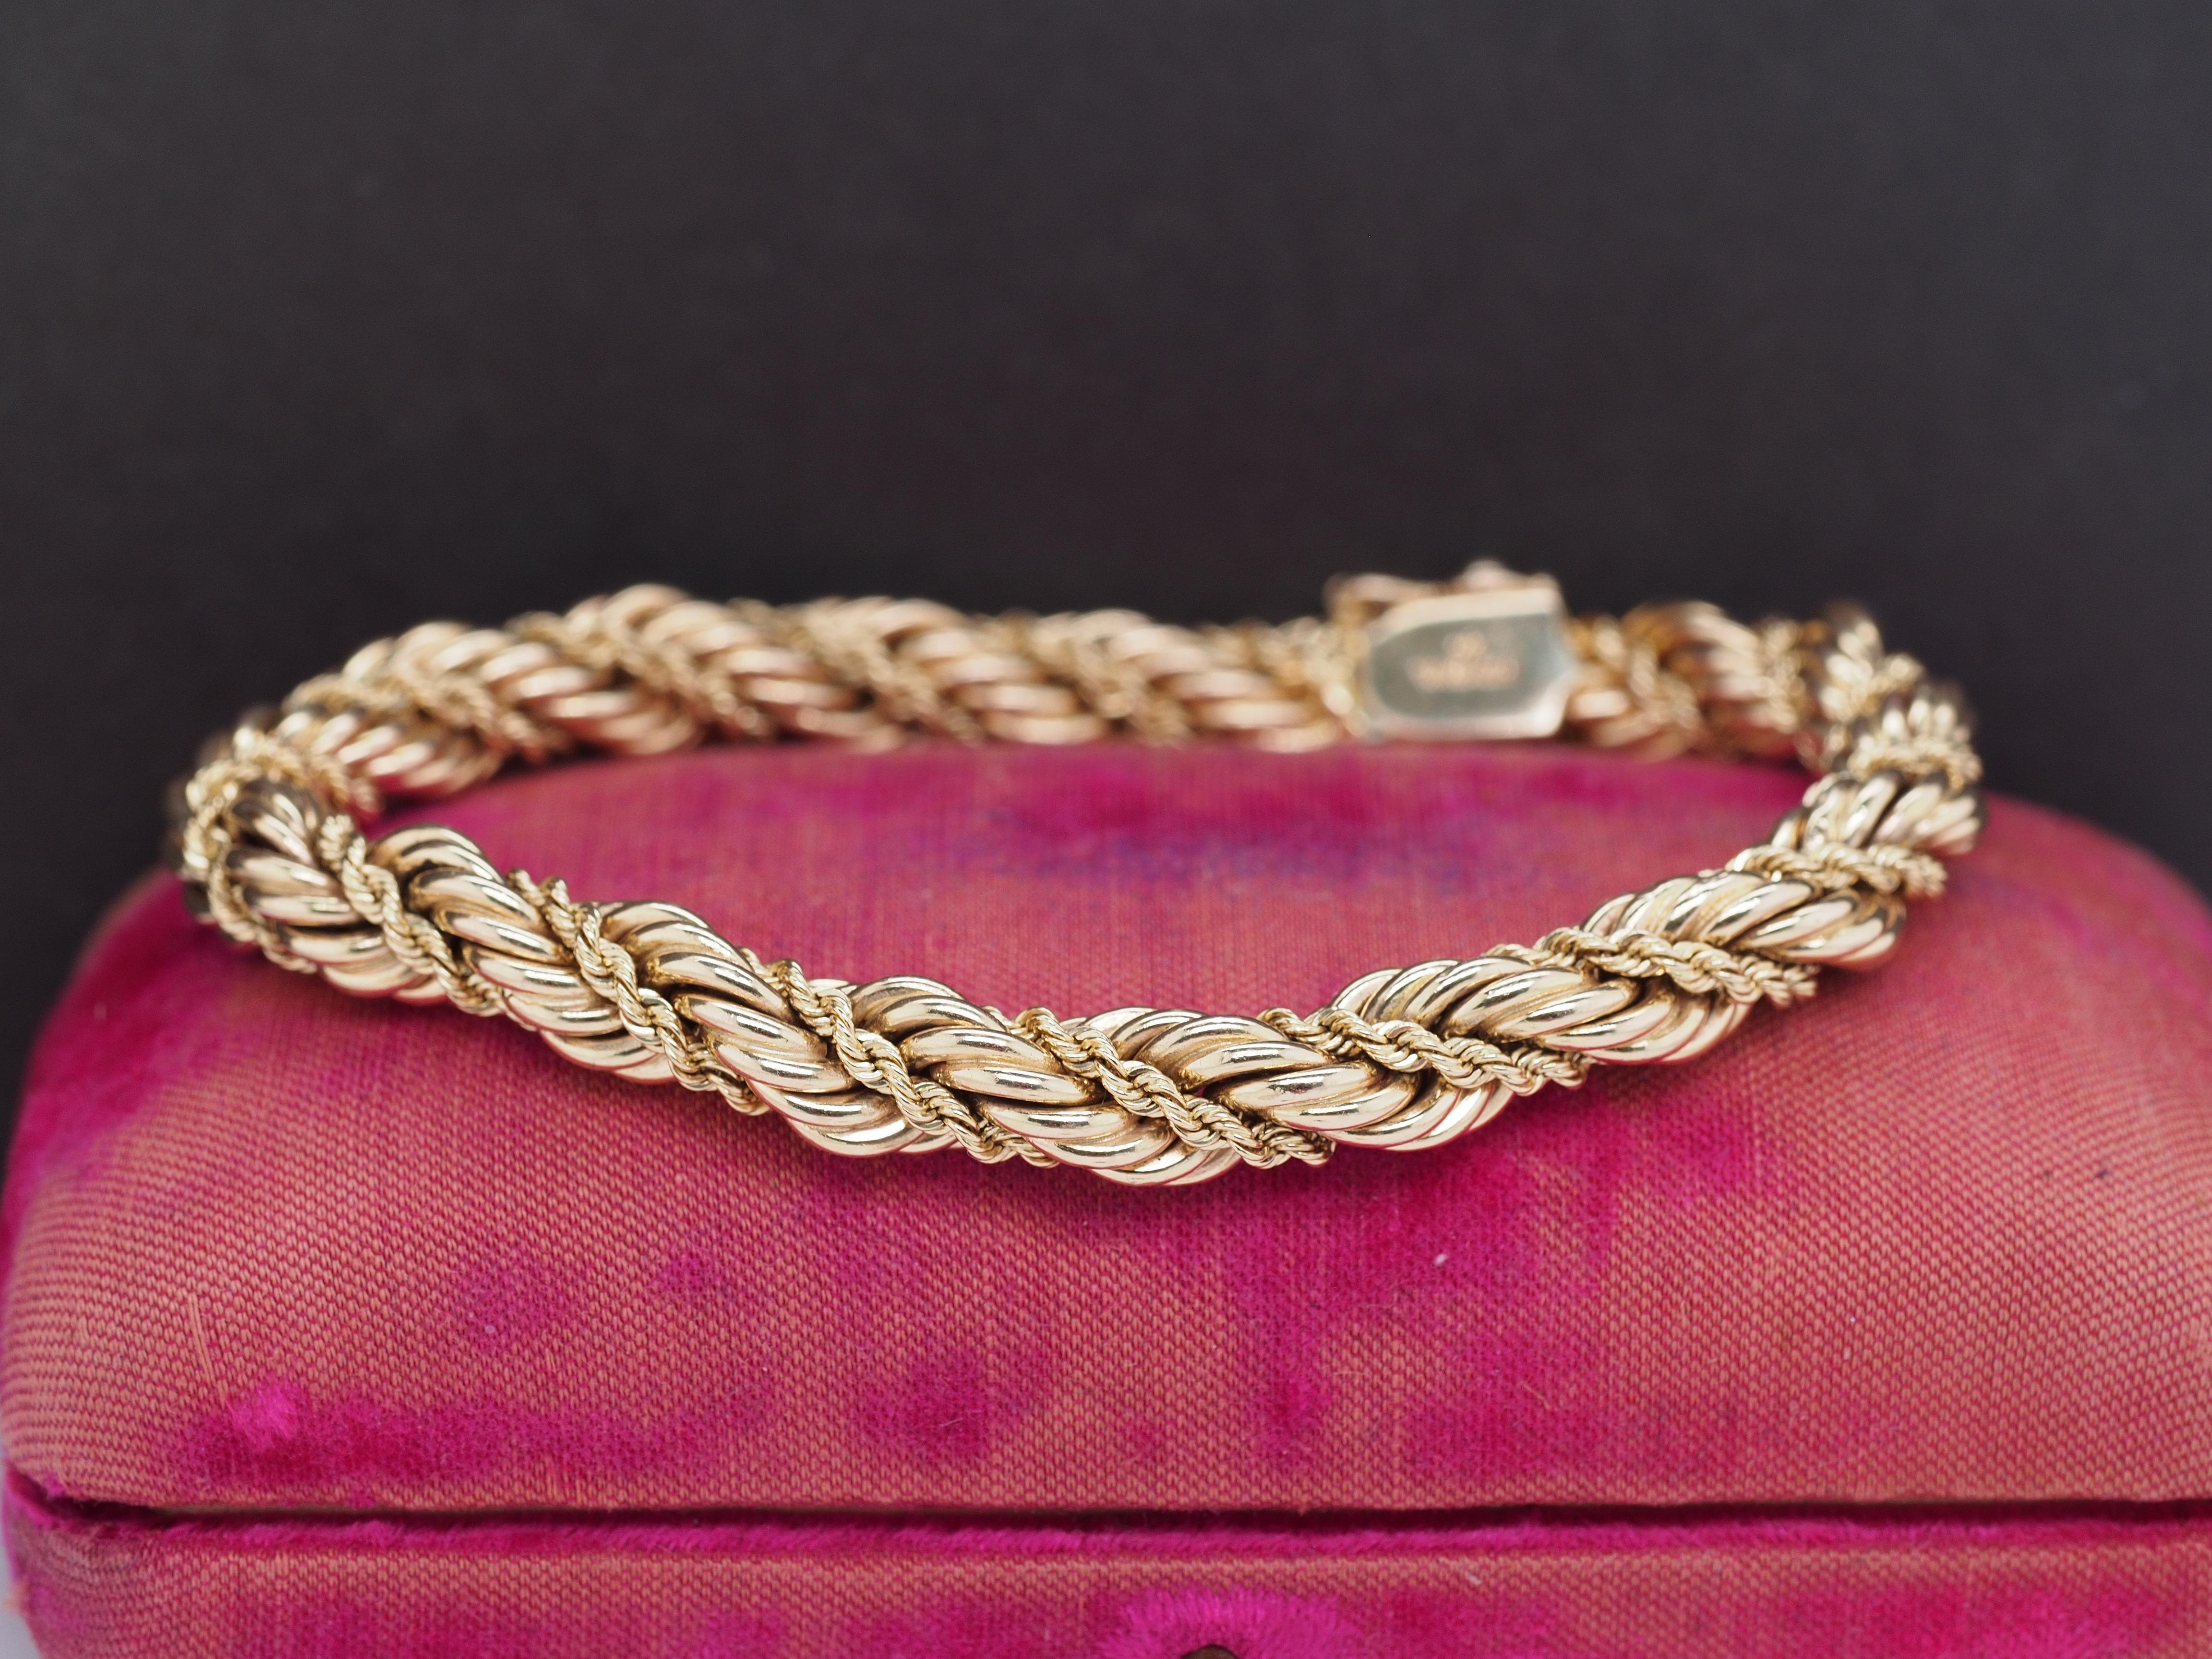 Year: 1960s
Item Details:
Metal Type: 14K Yellow Gold [Hallmarked, and Tested]
Weight: 24.7 grams
Bracelet Length Measurement: 7.25 Inches Long
Bracelet Width Measurement: 7MM Wide
Condition: Excellent